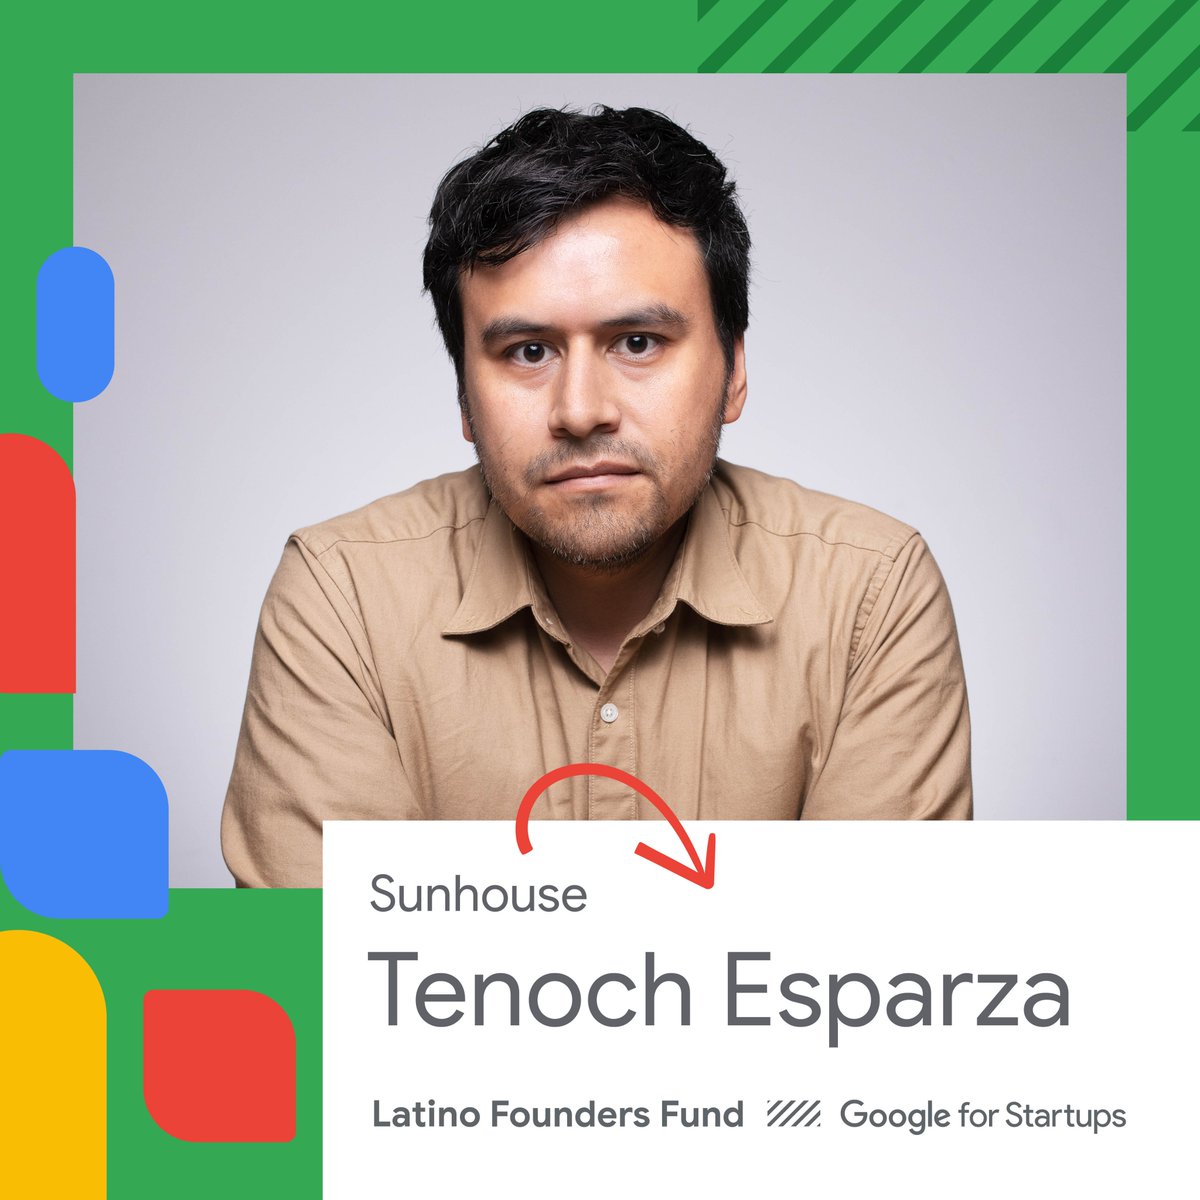 Congrats to Backstage cos @ride_beyond, @ToDooly and @SunhouseInc who were selected for the @GoogleStartups Latino Founders Fund! When we #FundLatinoFounders, we empower entire communities. Thank you to our partner @GoogleStartups for this funding! blog.google/outreach-initi…